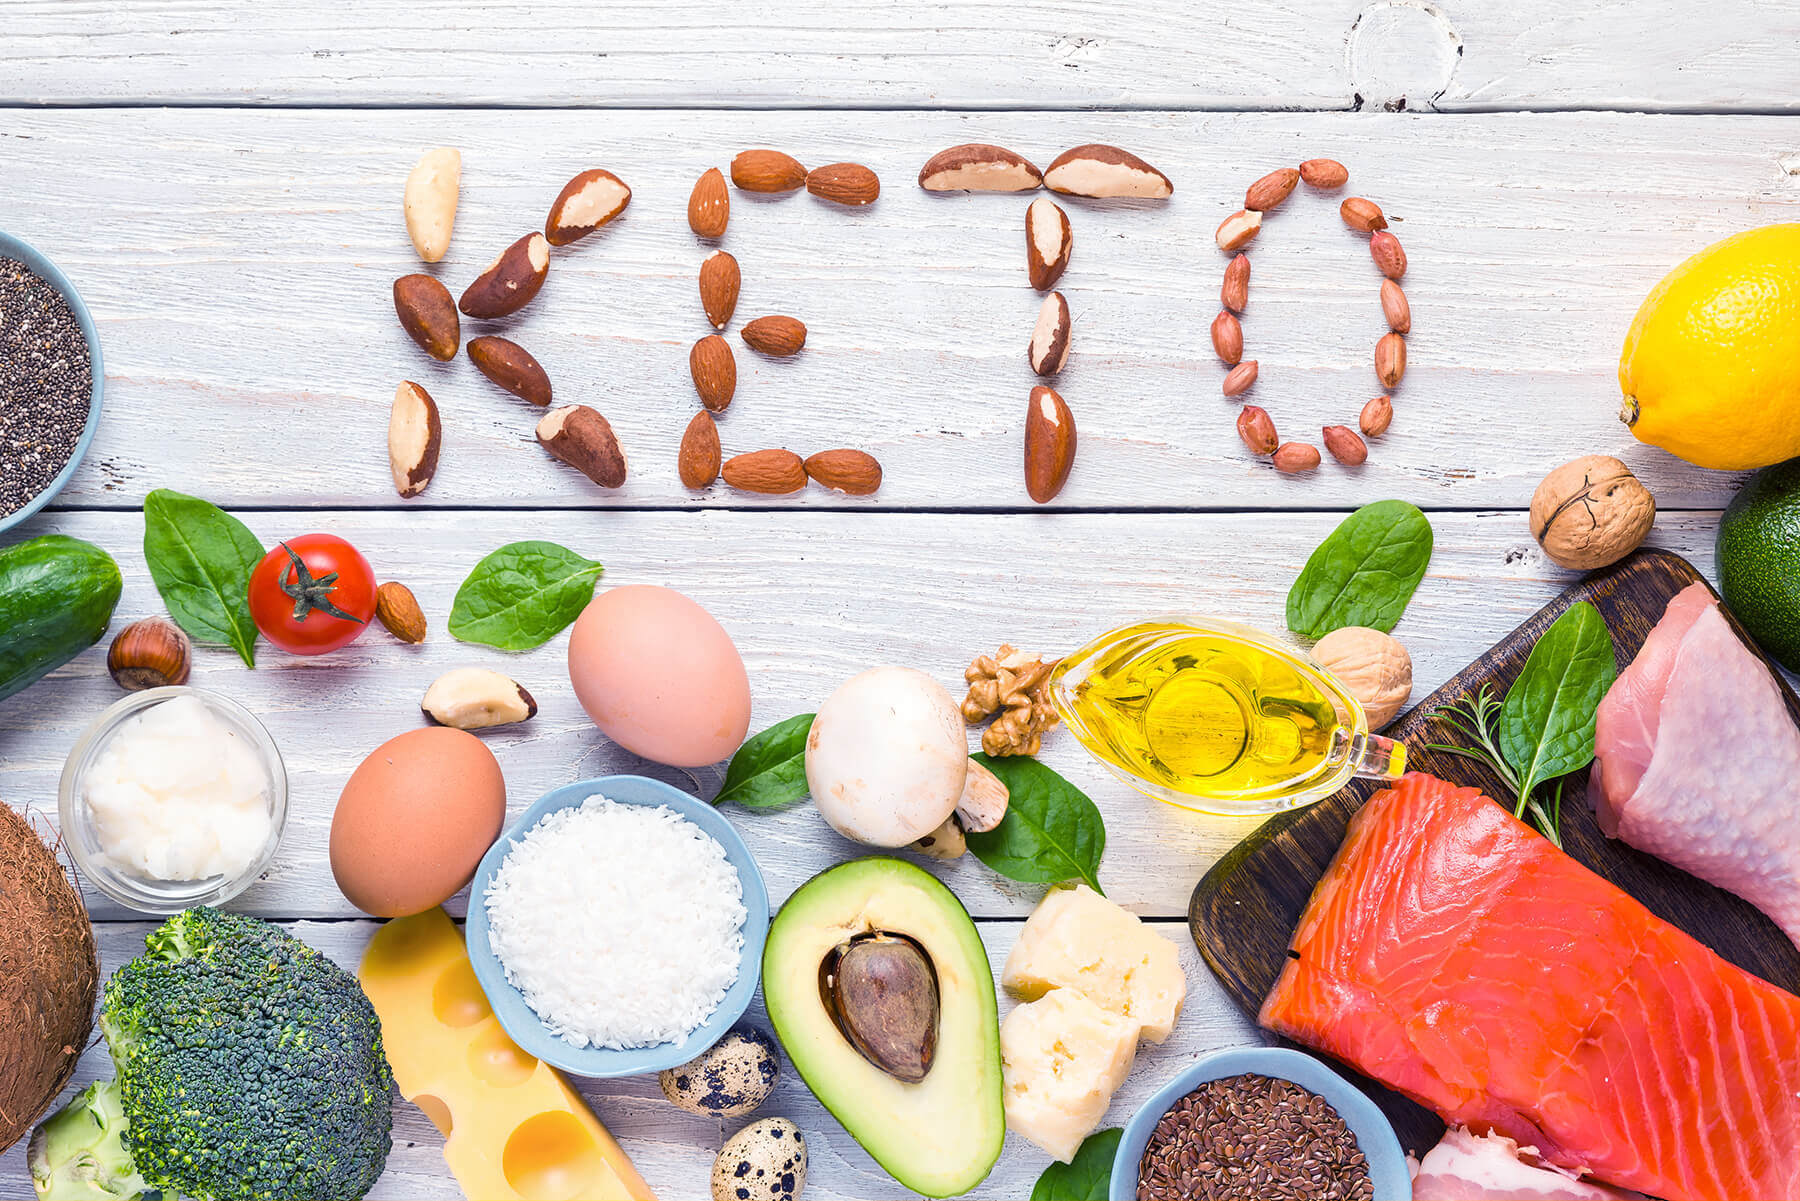 Keto for muscle growth: yay or nay?